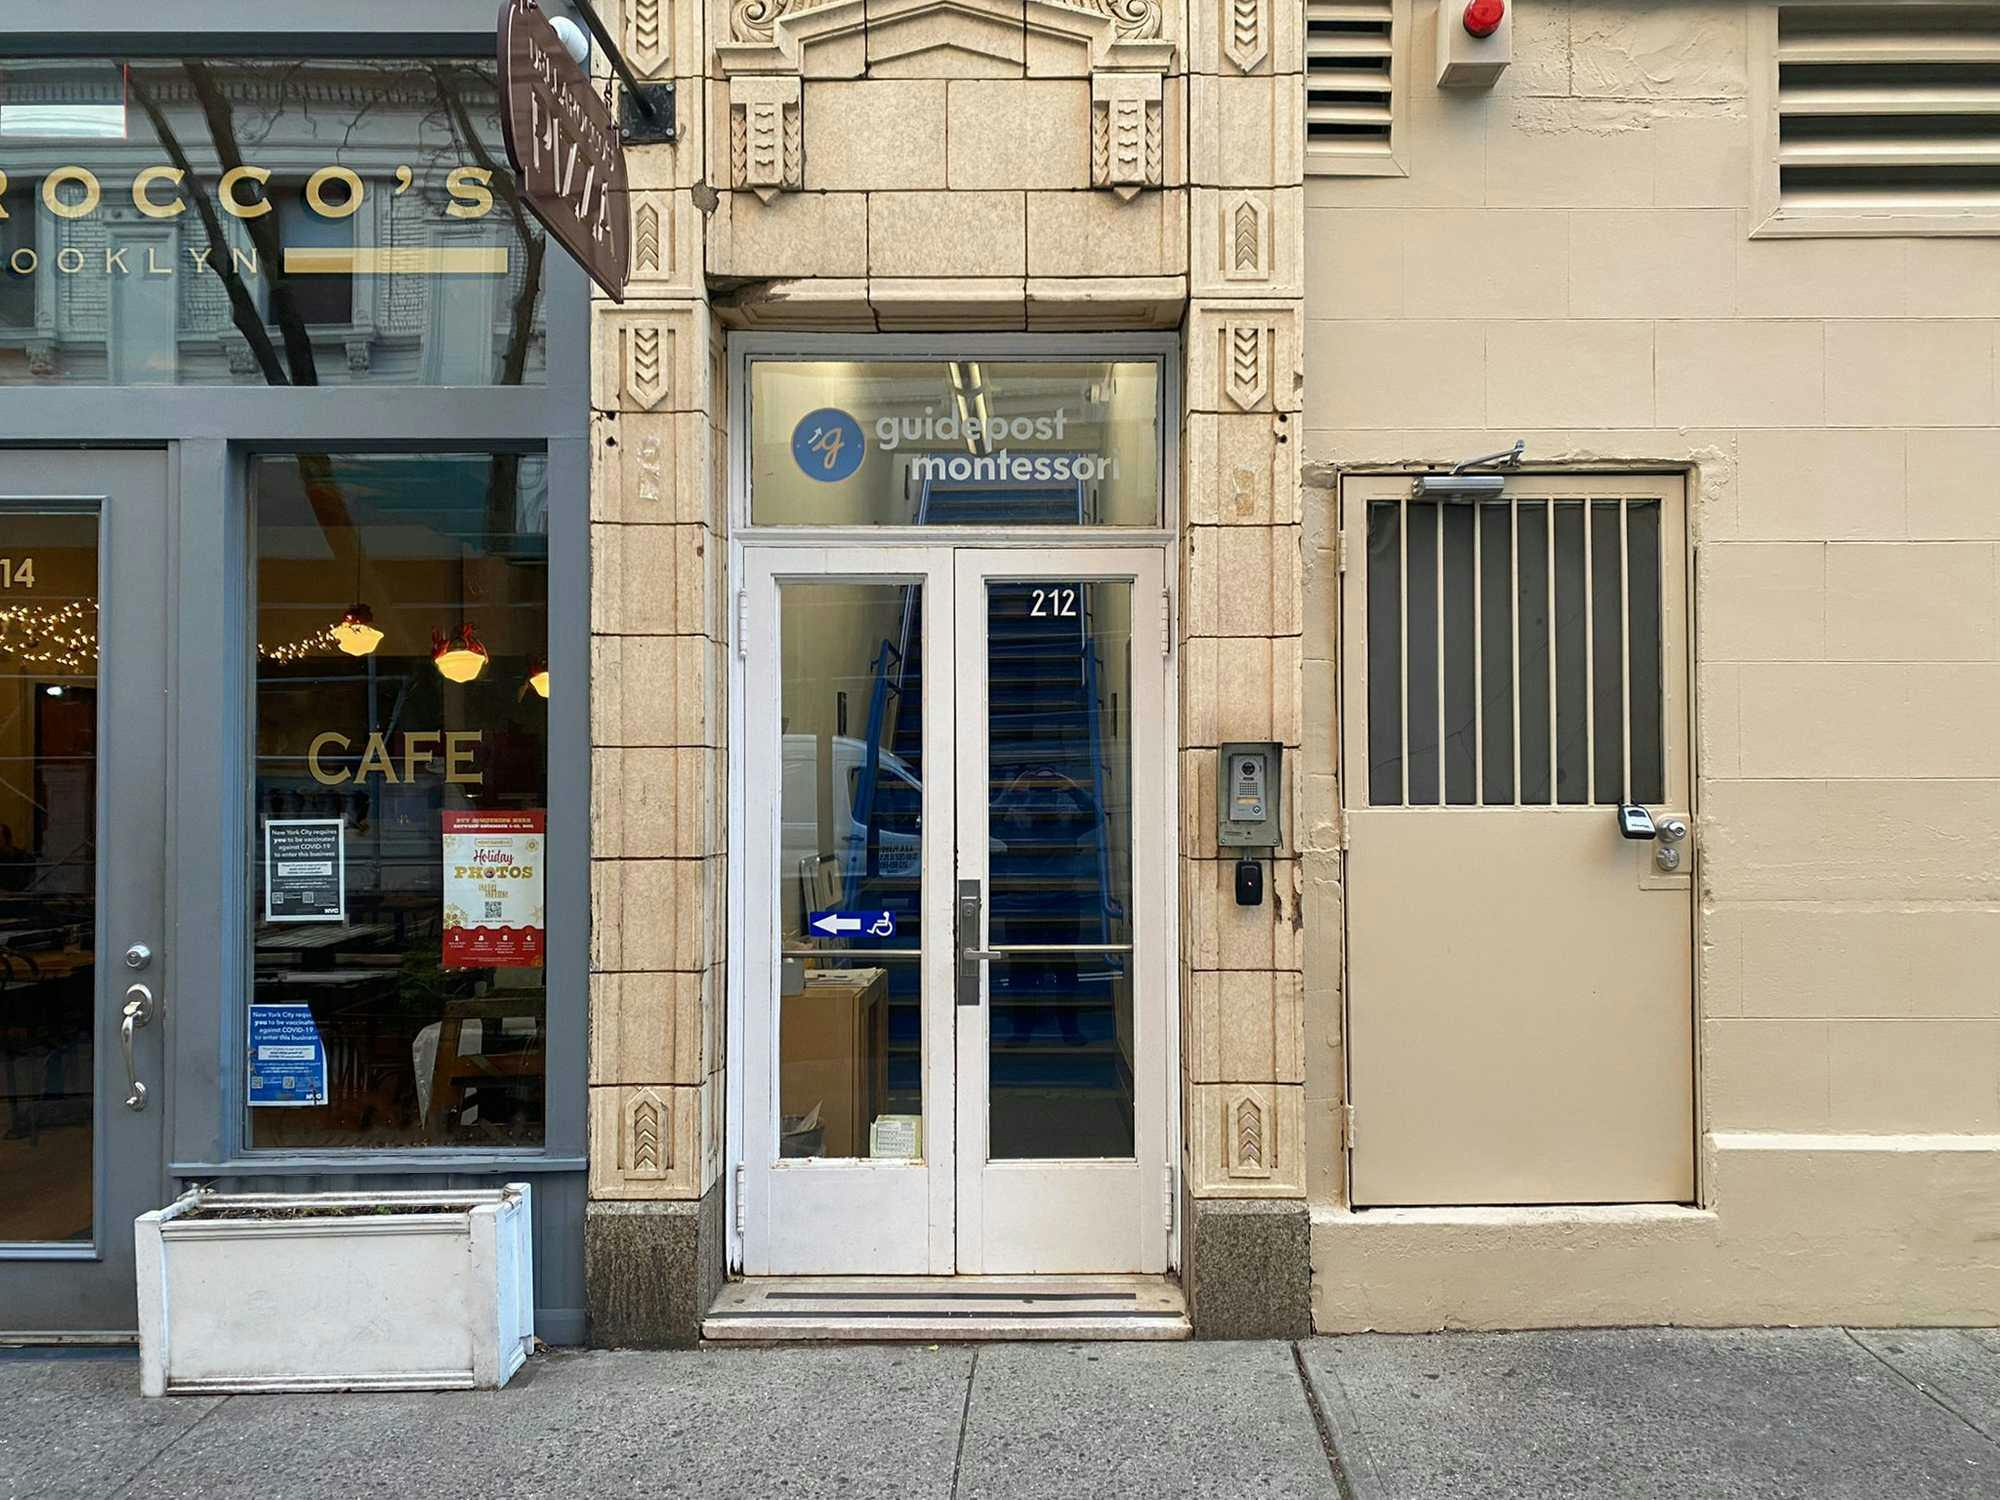 View of the entrance to Guidepost Montessori at Brooklyn Heights that shows the front entrance with a branded Guided Montessori sign and the cafe entrance next door.